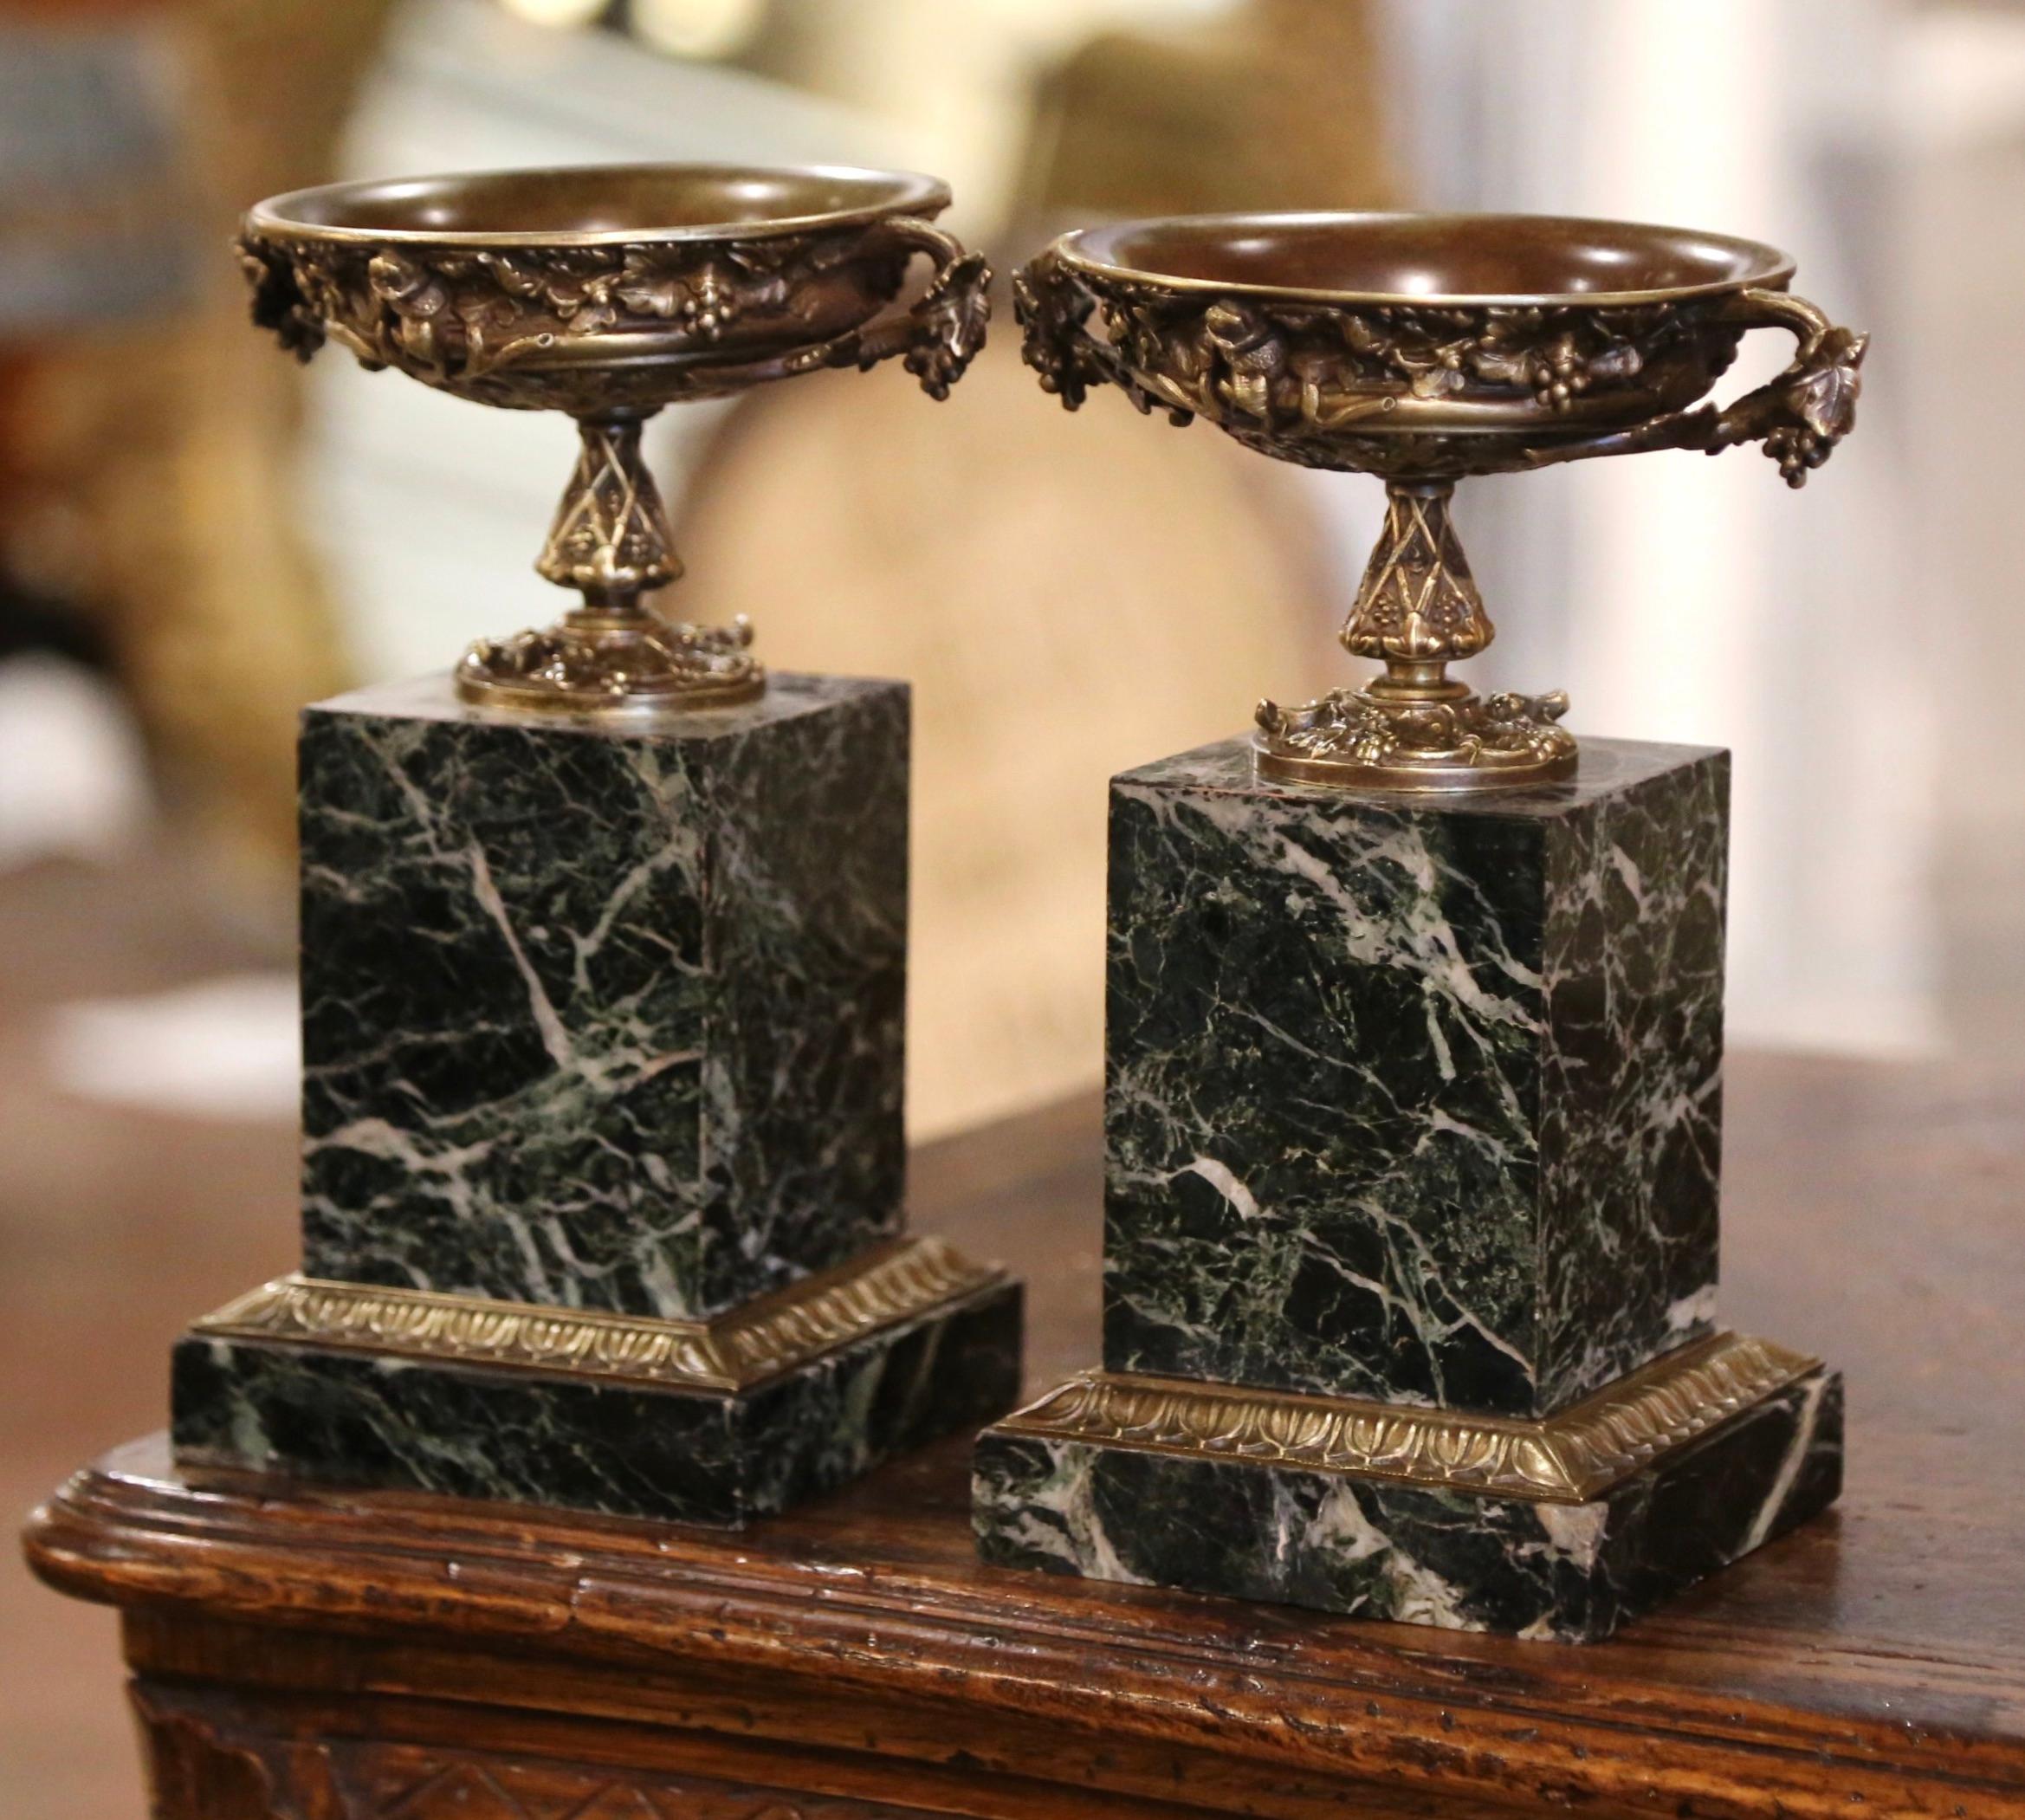 Catch loose change or other odds and ends with this pair of 19th century decorative tazza dishes. Crafted in France circa 1880, each compote sits on a square green marble base with repousse brass band at the bottom. The ornate vide-poche stands on a